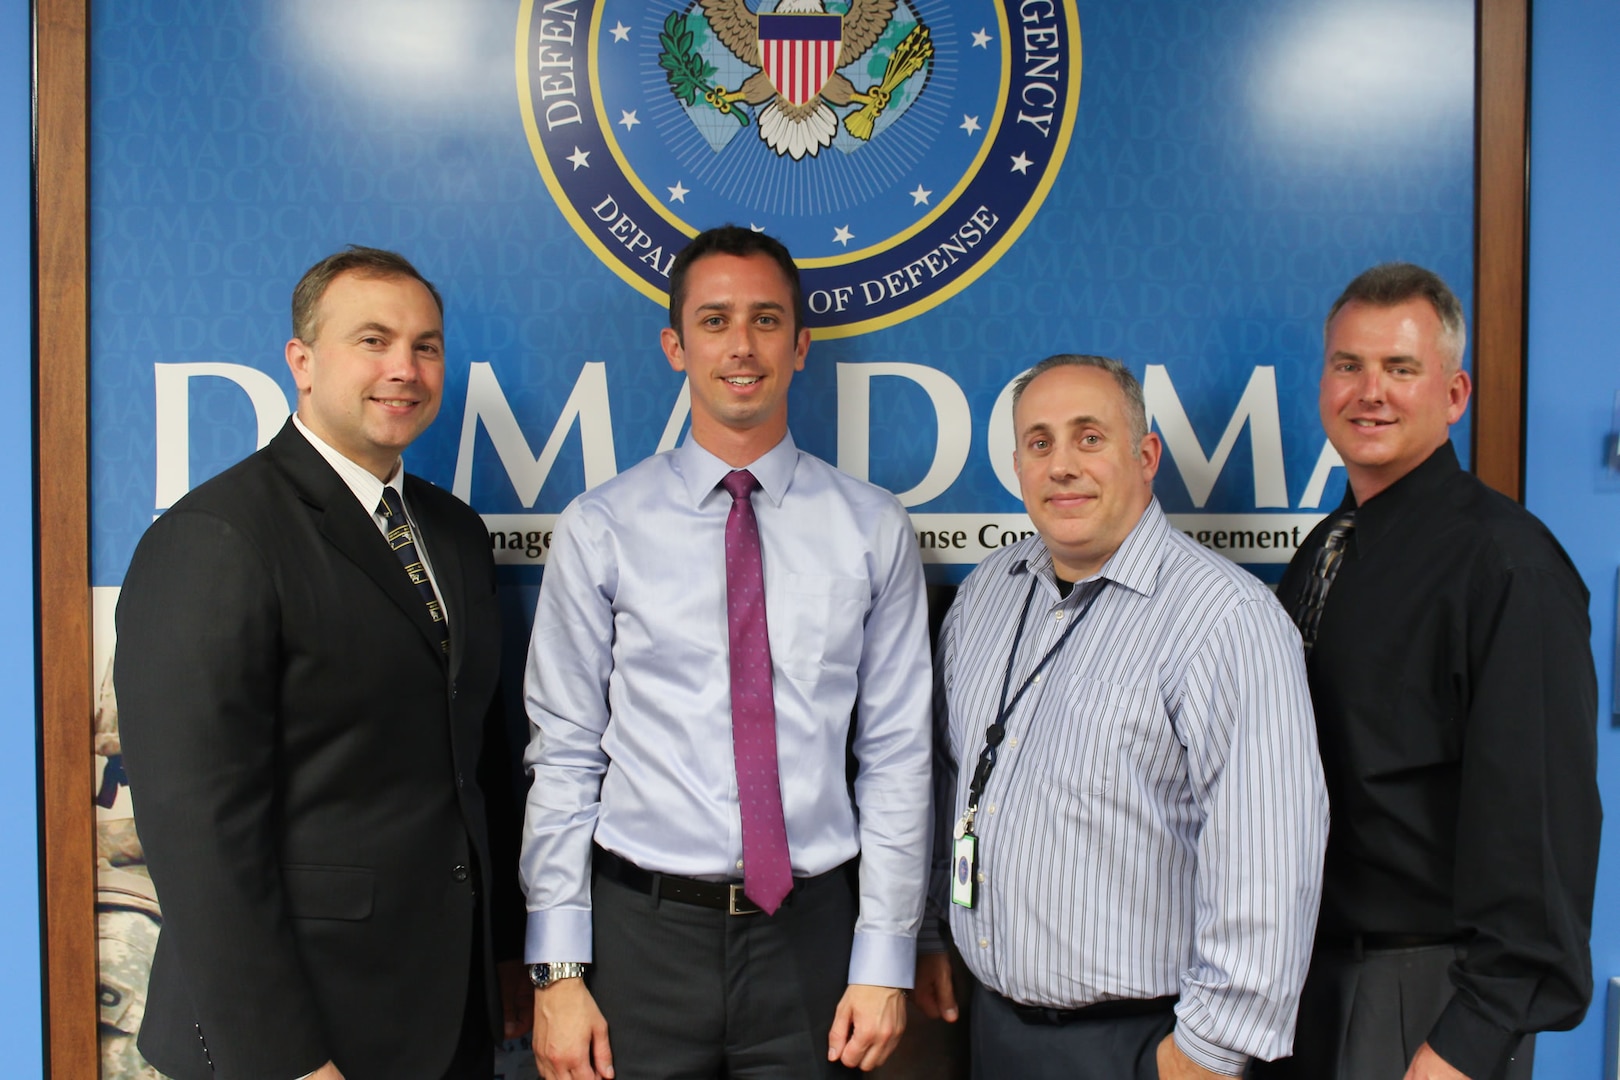 In addition to their civilian job duties, several Defense Contract Management Agency Garden City employees from New York also serve in the reserve or National Guard. (From left) Cliff Allen, an attorney who is in the Navy Reserve; Doug Nelson, an administrative contracting officer who also serves in the Navy Reserve; Tom Valentino, a quality assurance specialist who serves in the Air Force Reserve; and Malcolm Timoney, a quality assurance specialist who recently retired from the Air National Guard. 